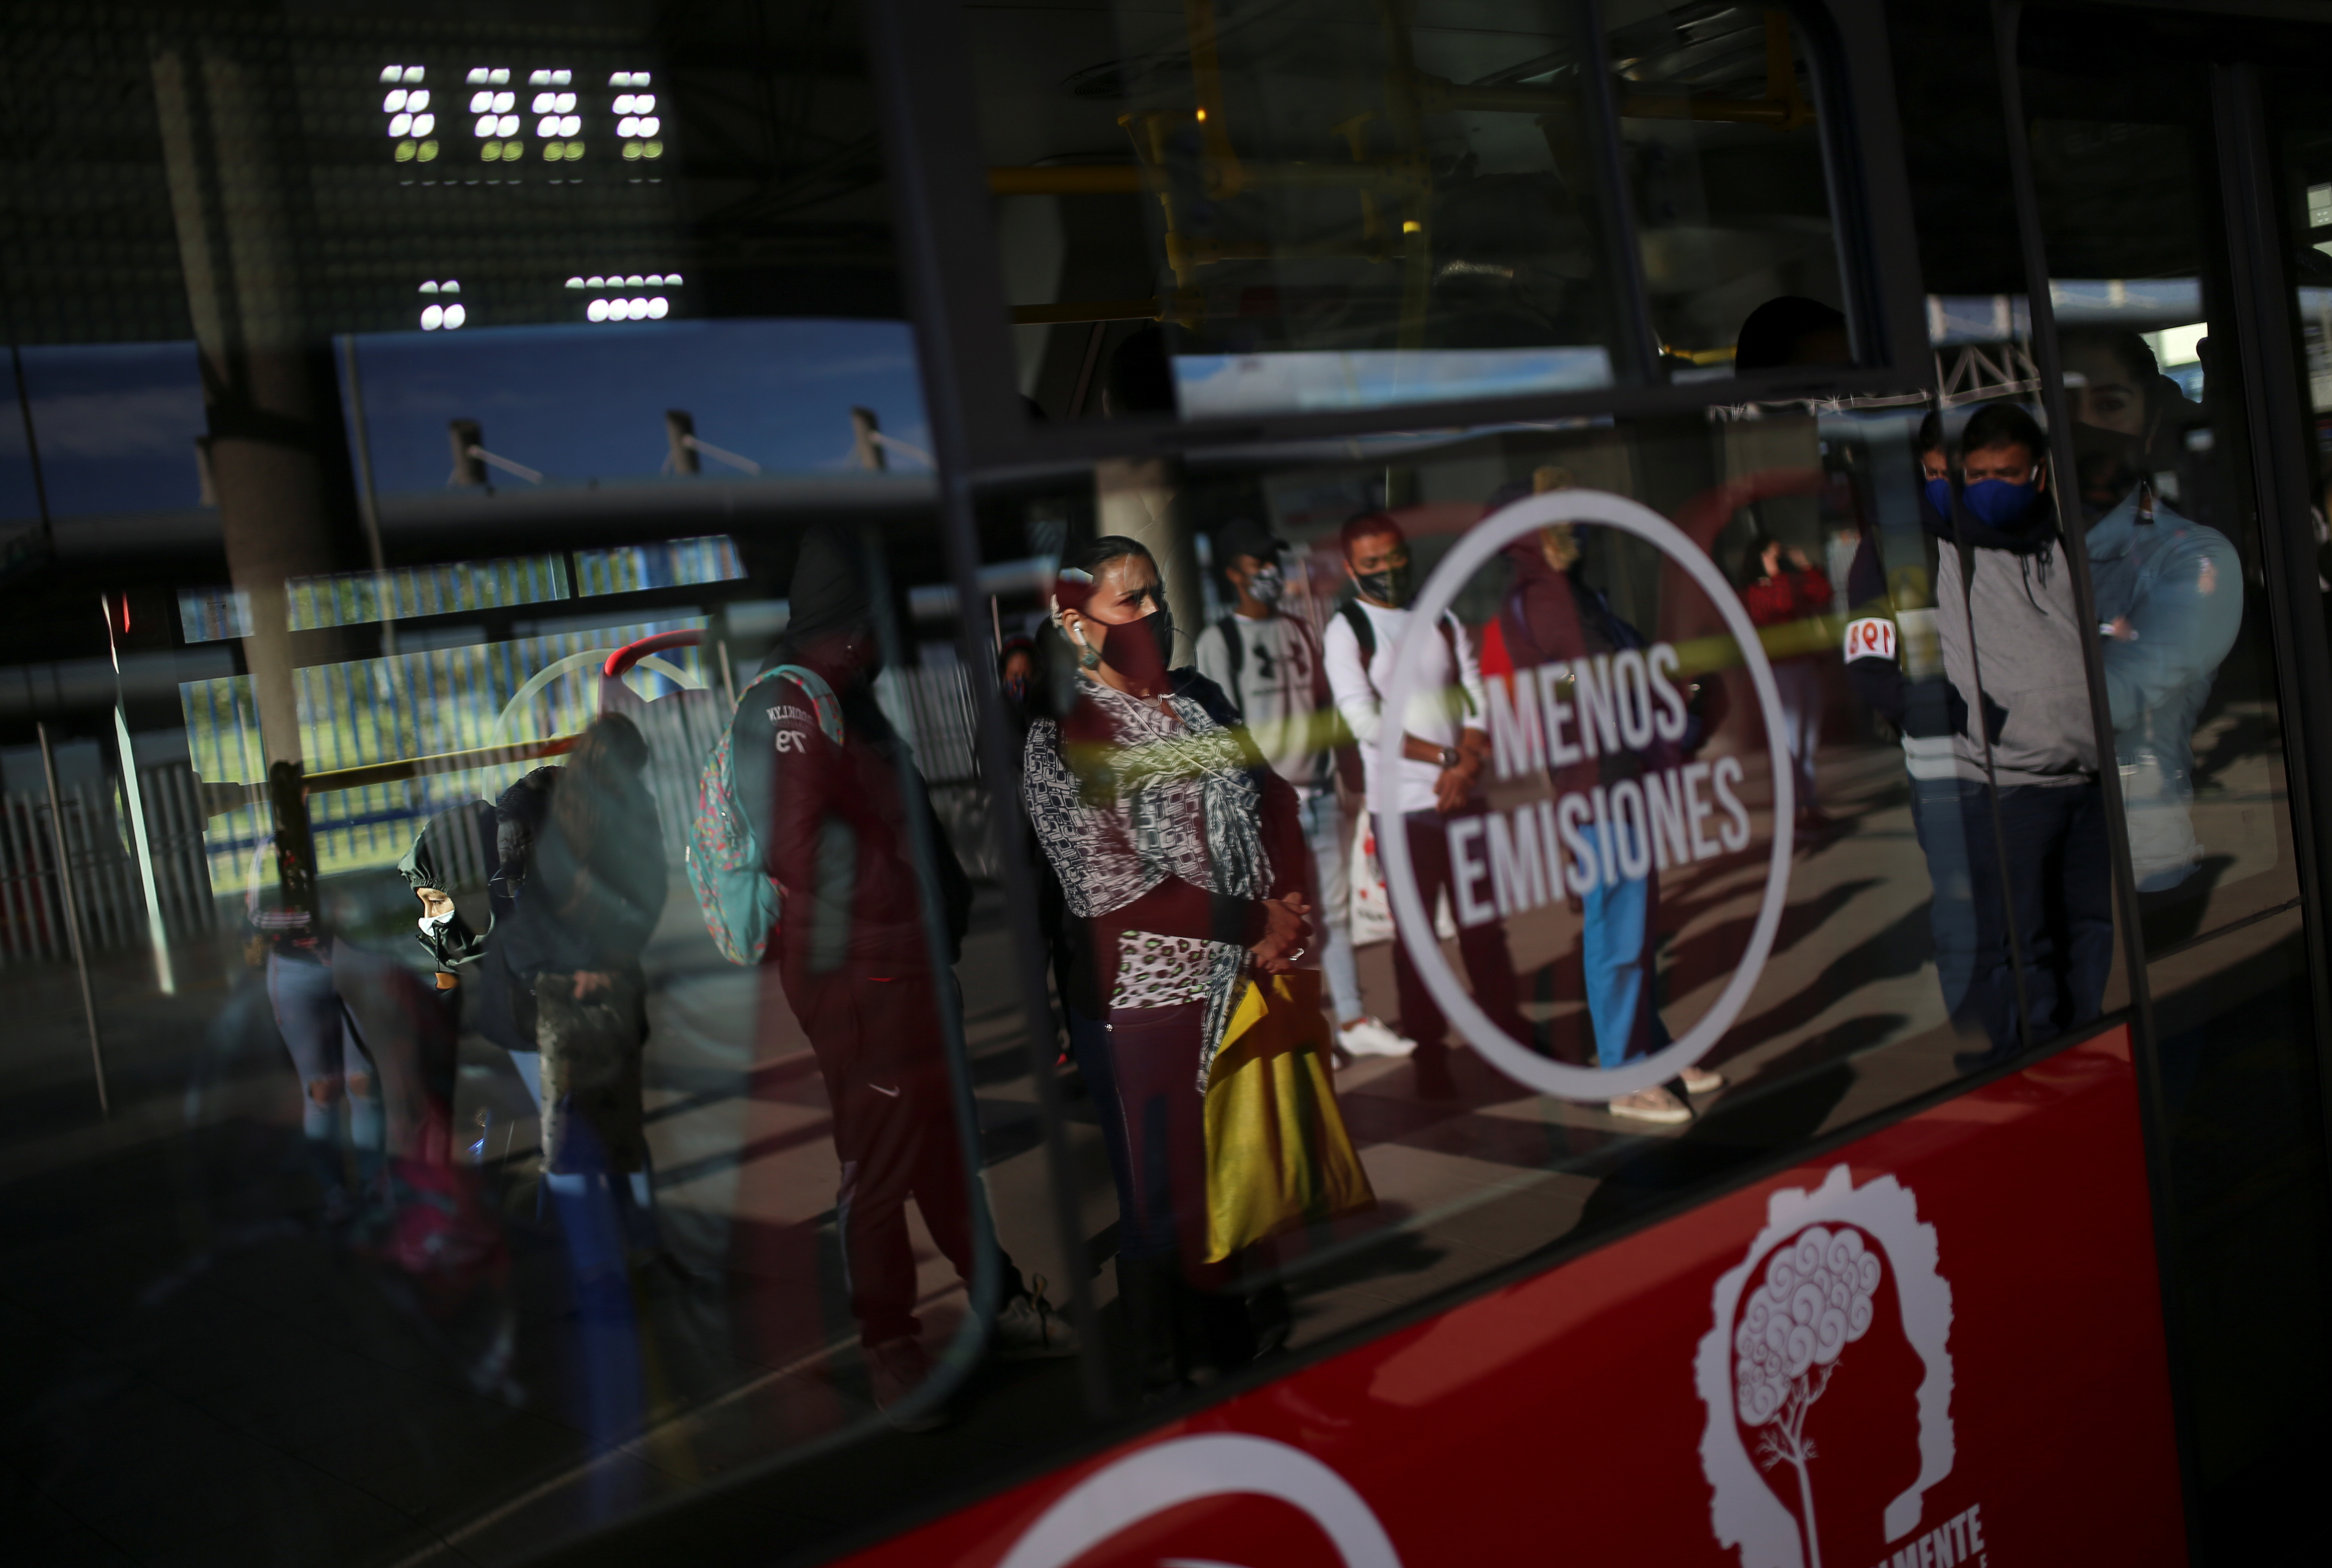 People wearing protective masks due to the ongoing coronavirus disease (COVID-19) outbreak, are seen reflected in a bus window at a station of the TransMilenio public transport system after the mayor's office ended the quarantine in Bogota, Colombia August 27, 2020. REUTERS/Luisa Gonzalez